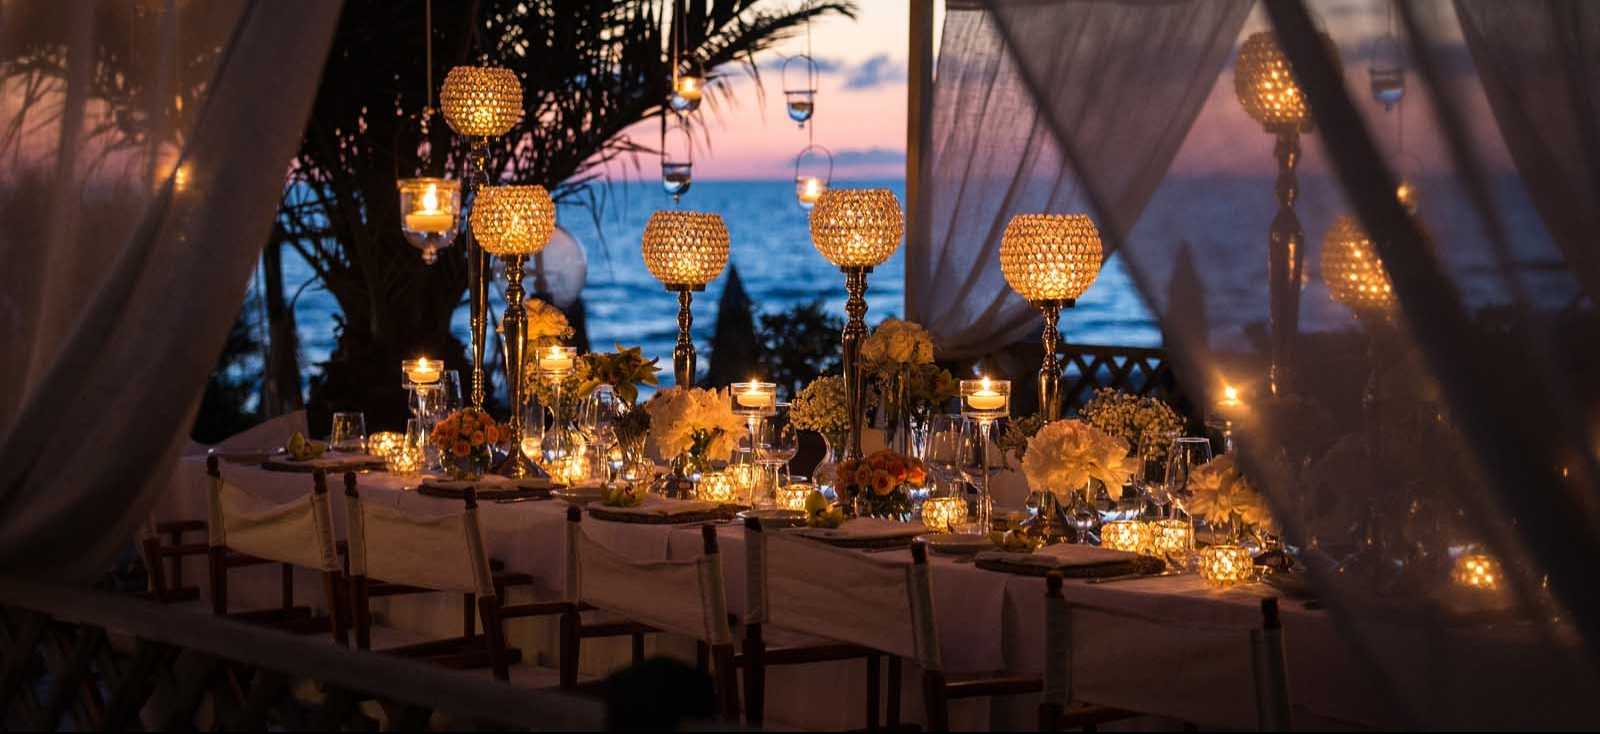 Wedding Reception and Party in Italy